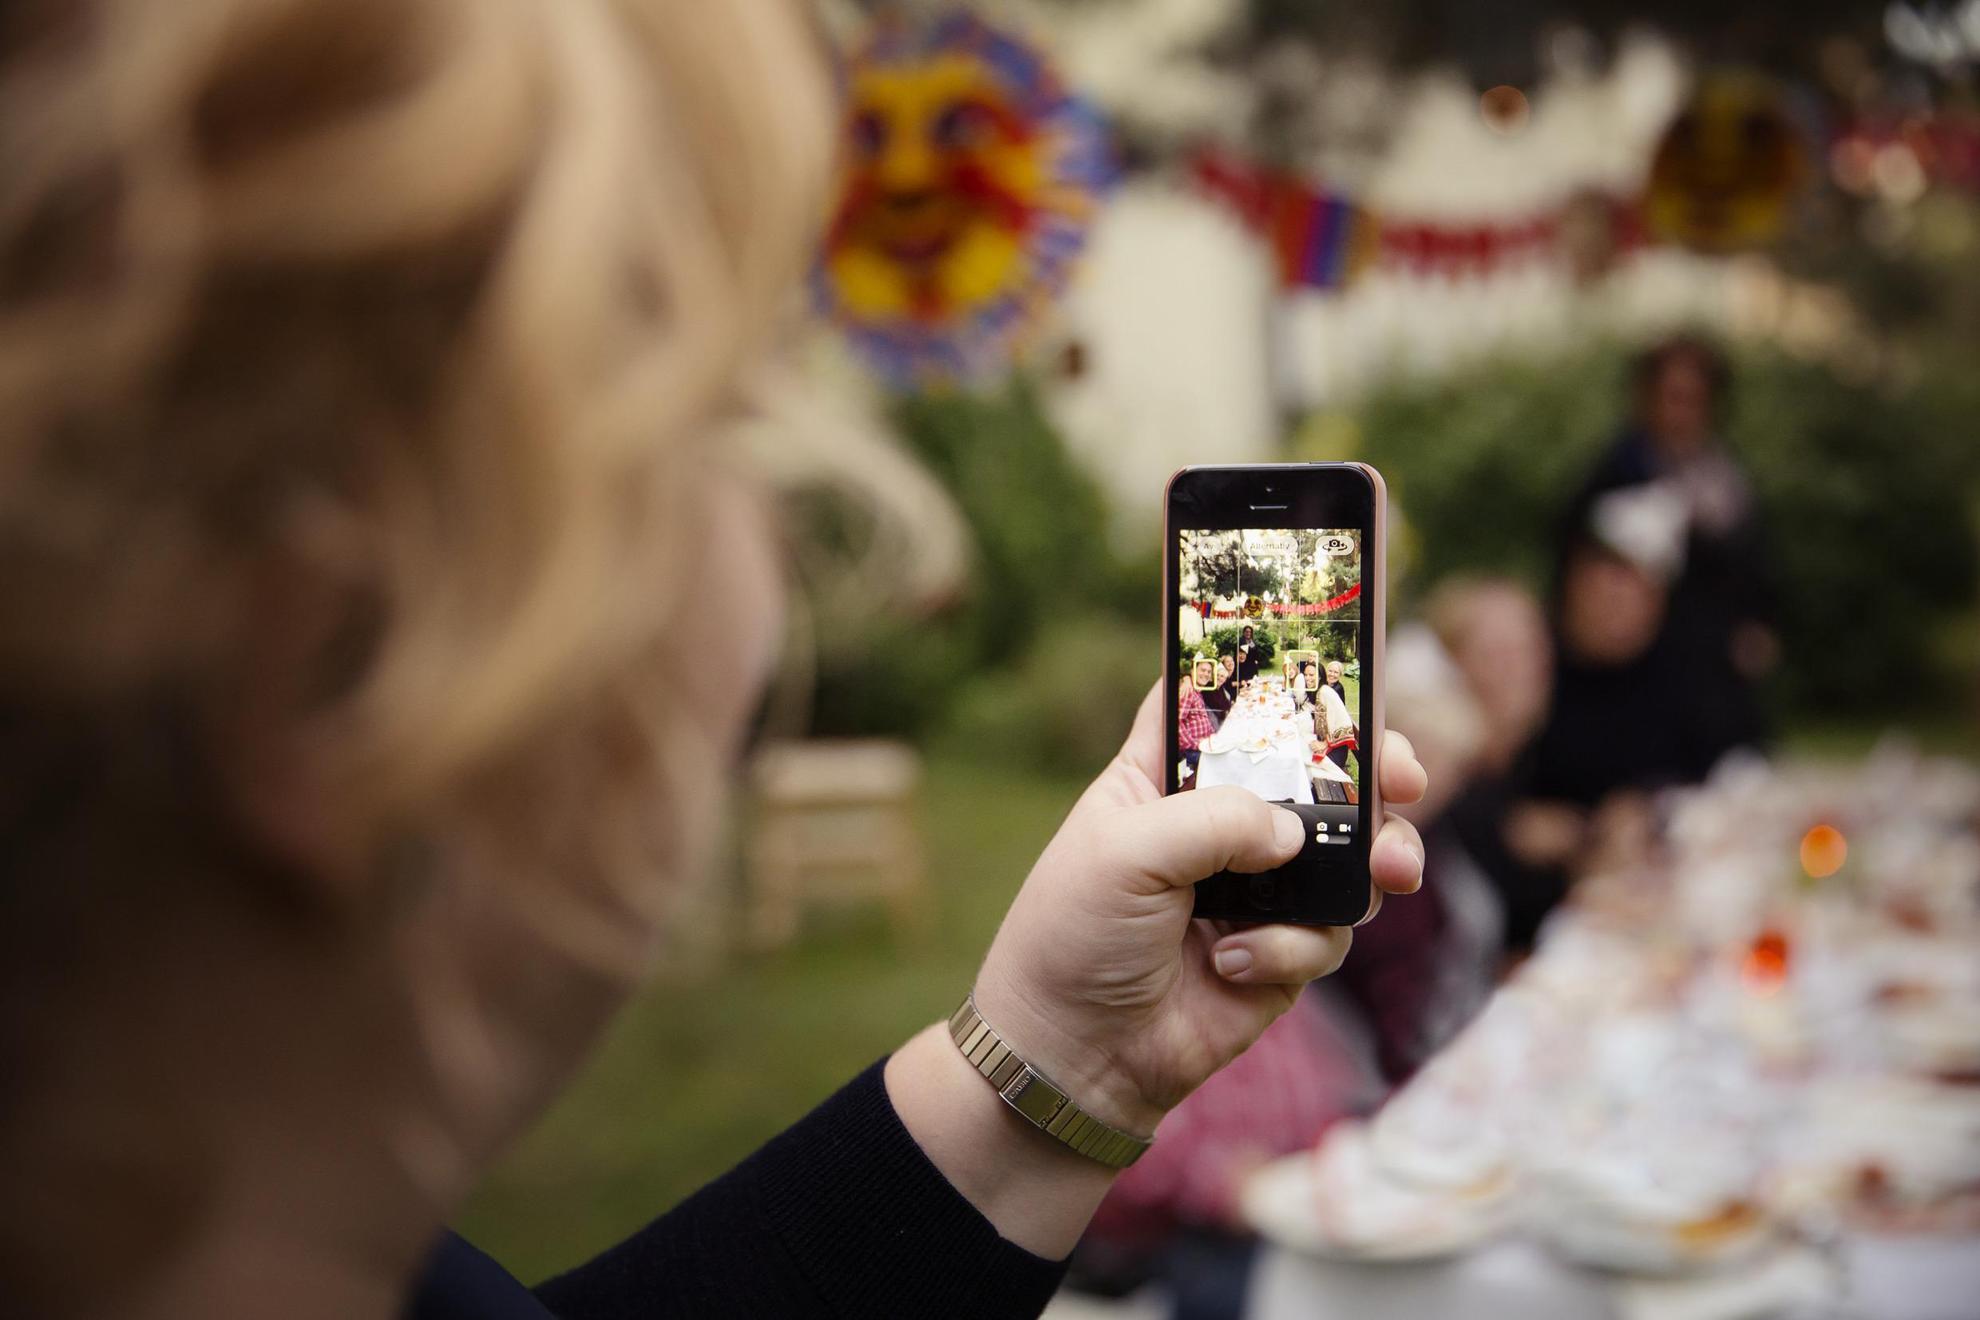 A woman is holding up a phone, taking pictures of the people sitting down by the decorated party table.